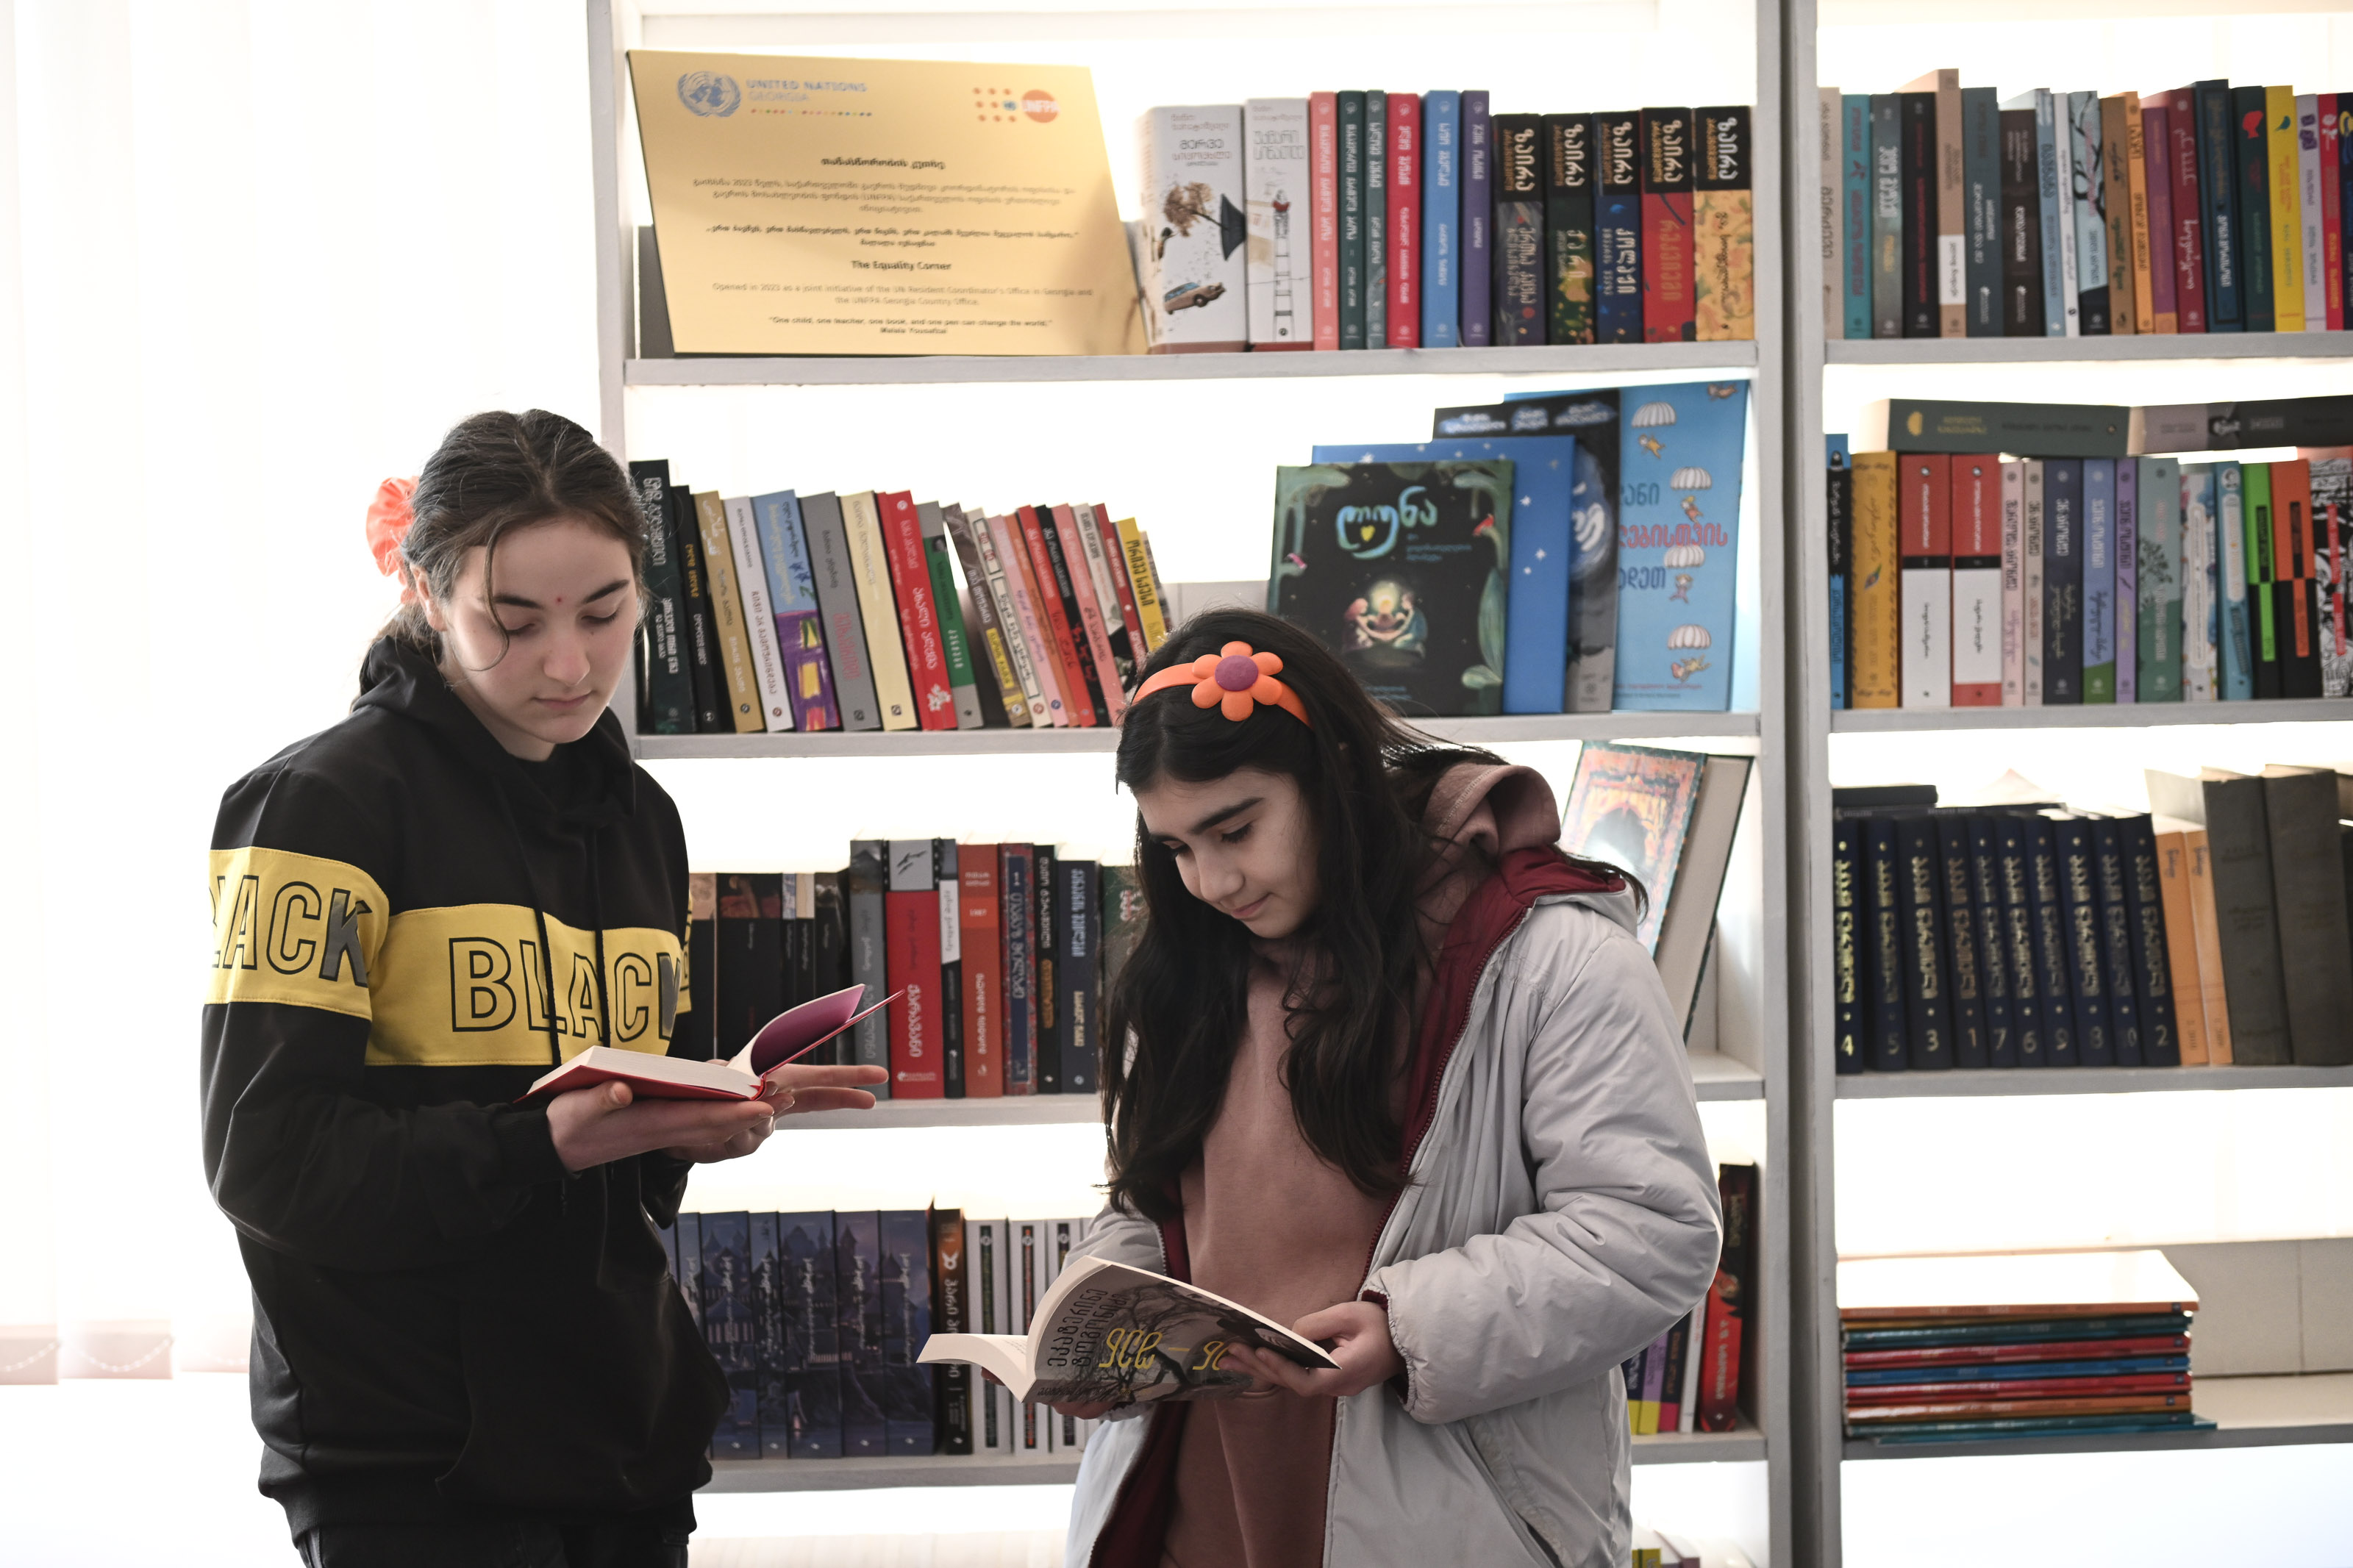 Two adolescent girls holding books, reading